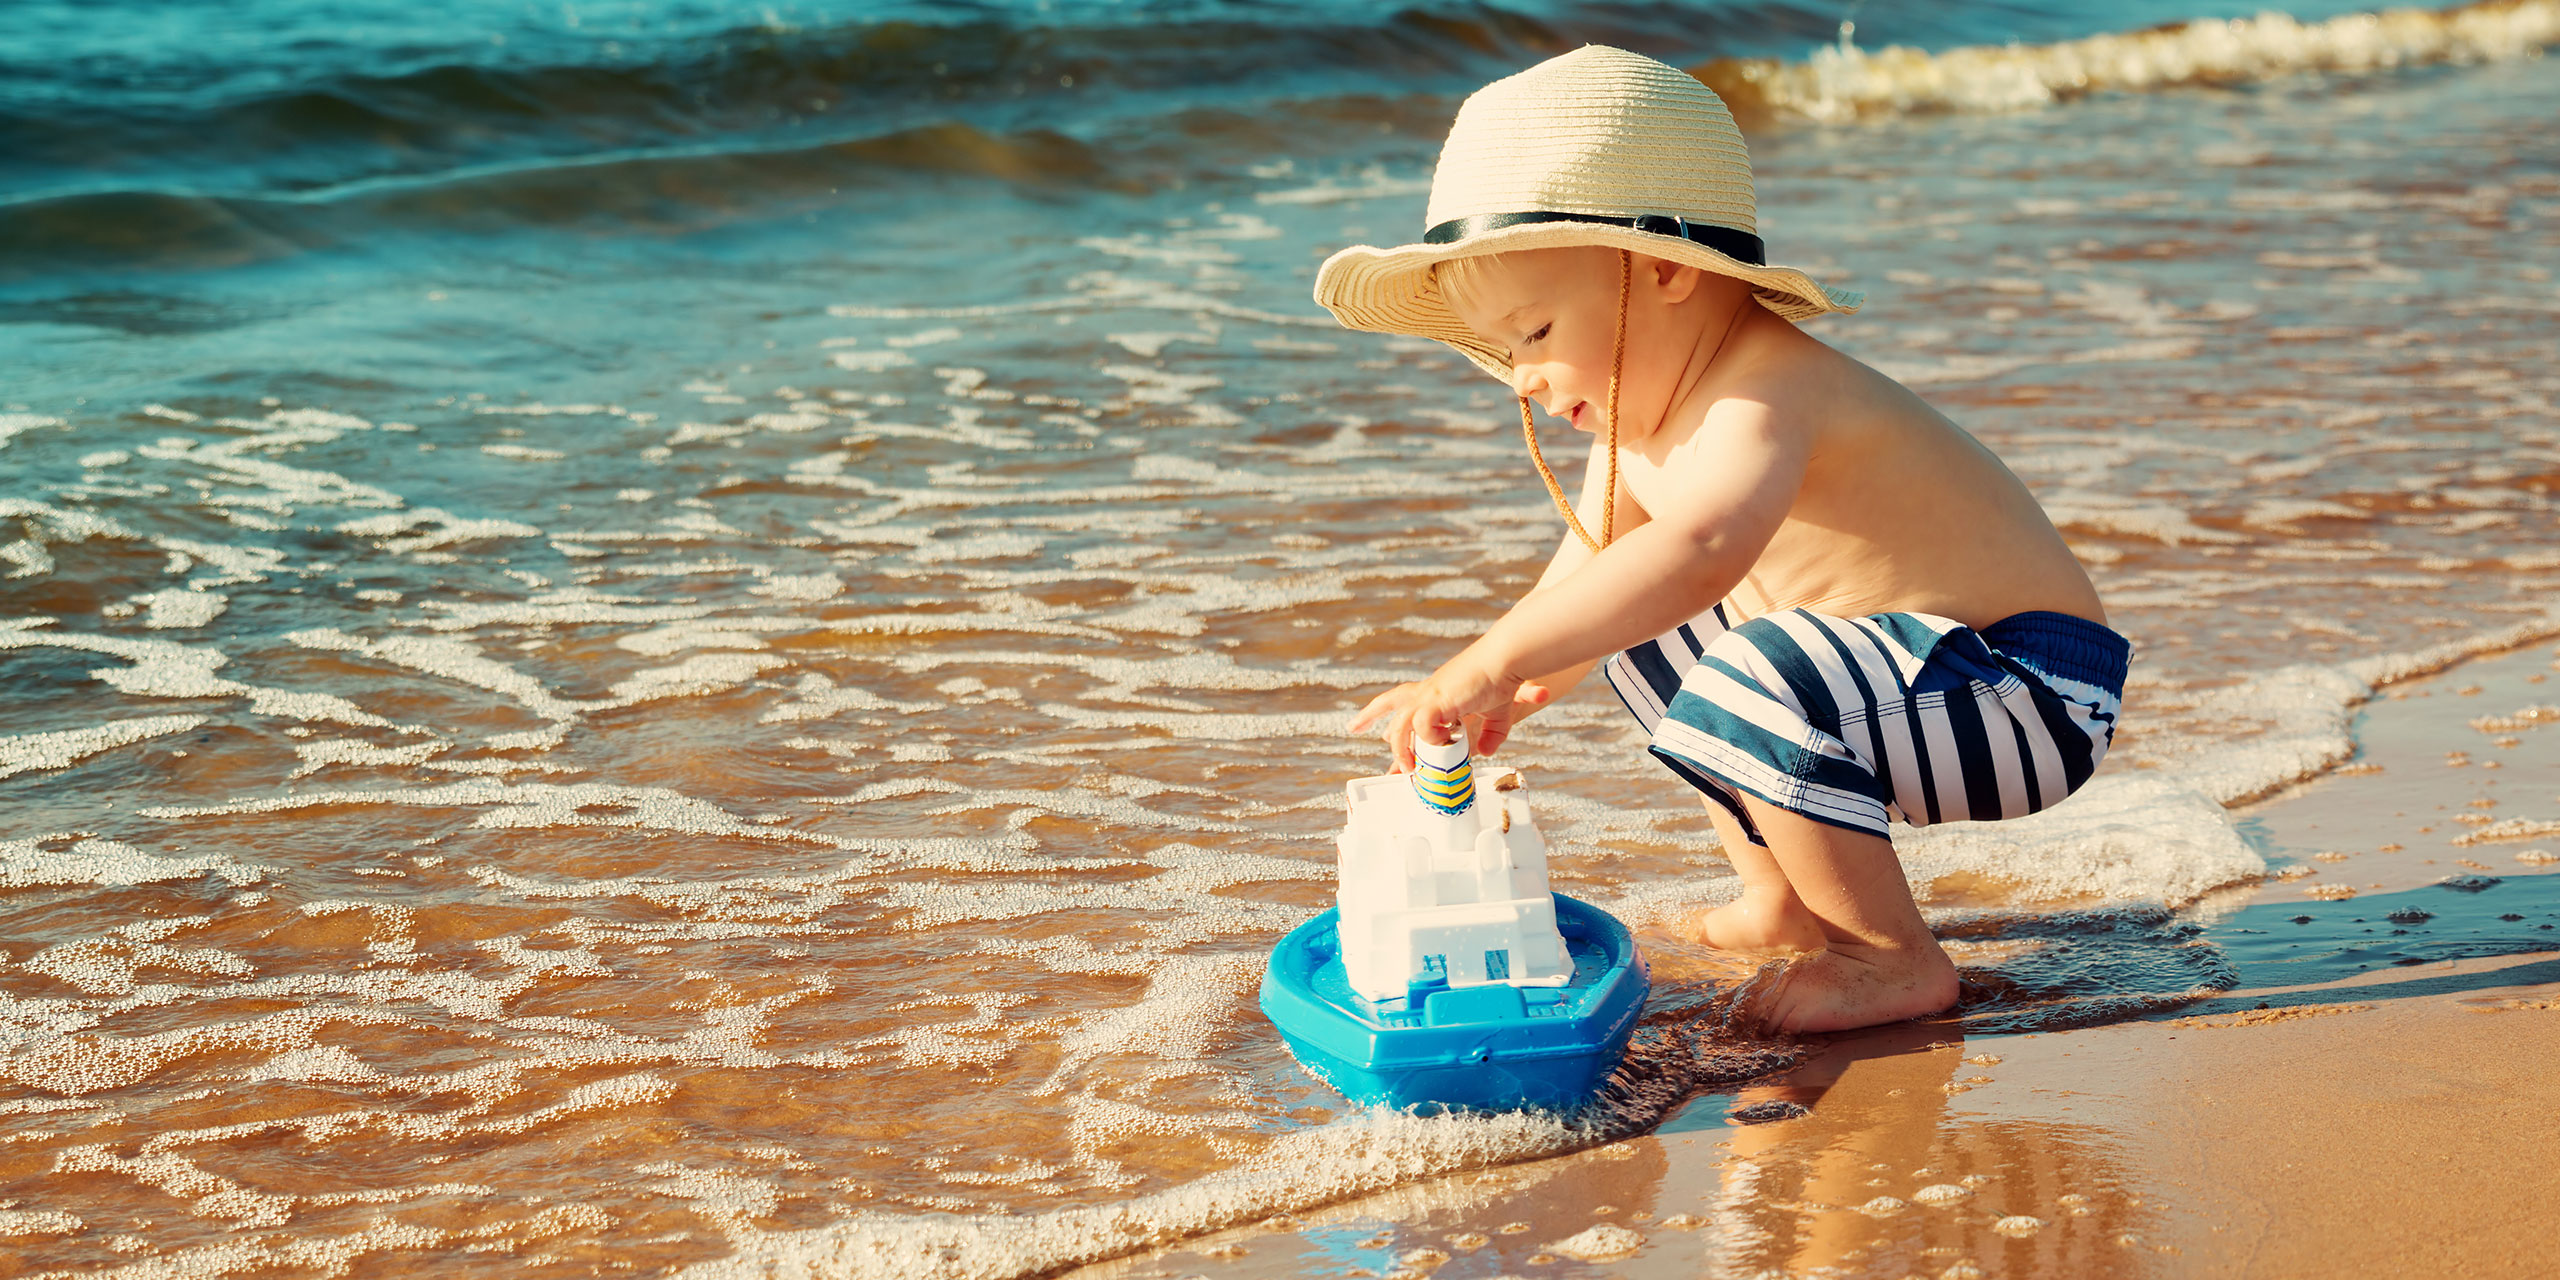 Boy Playing With Toy Boat on Beach; Courtesy of LeManna/Shutterstock.com